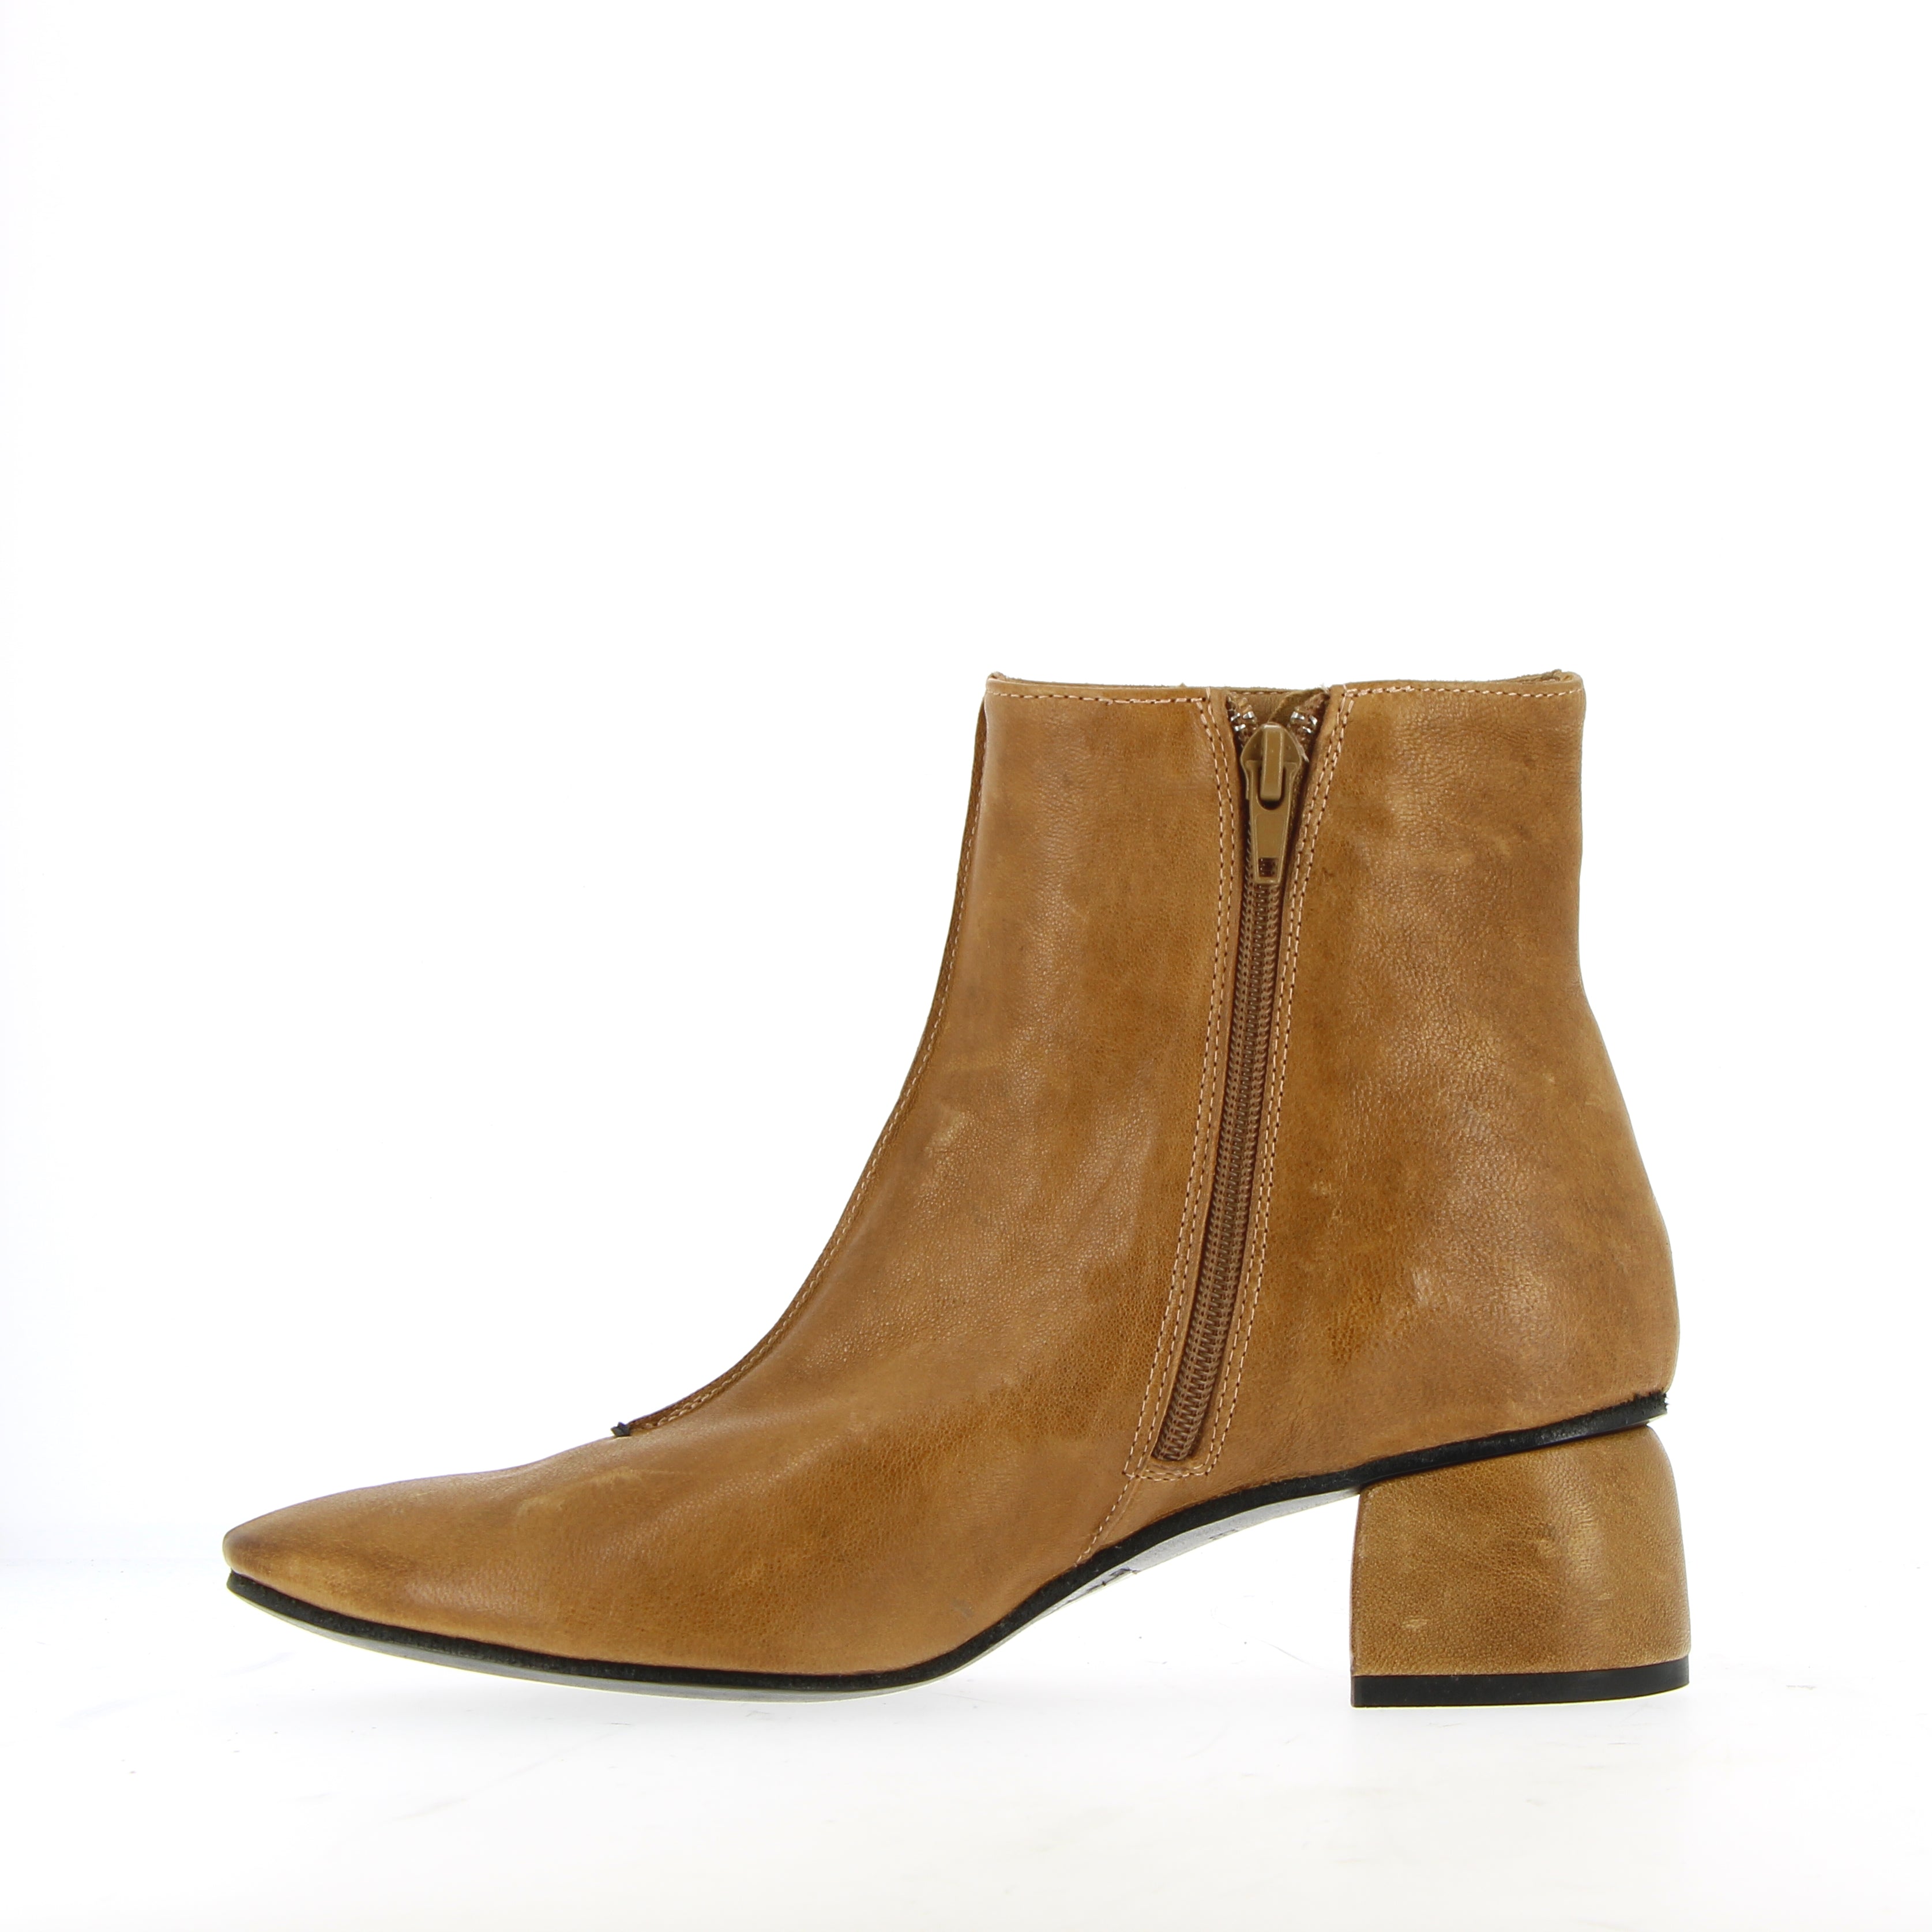 Soft ankle boot in leather calfskin